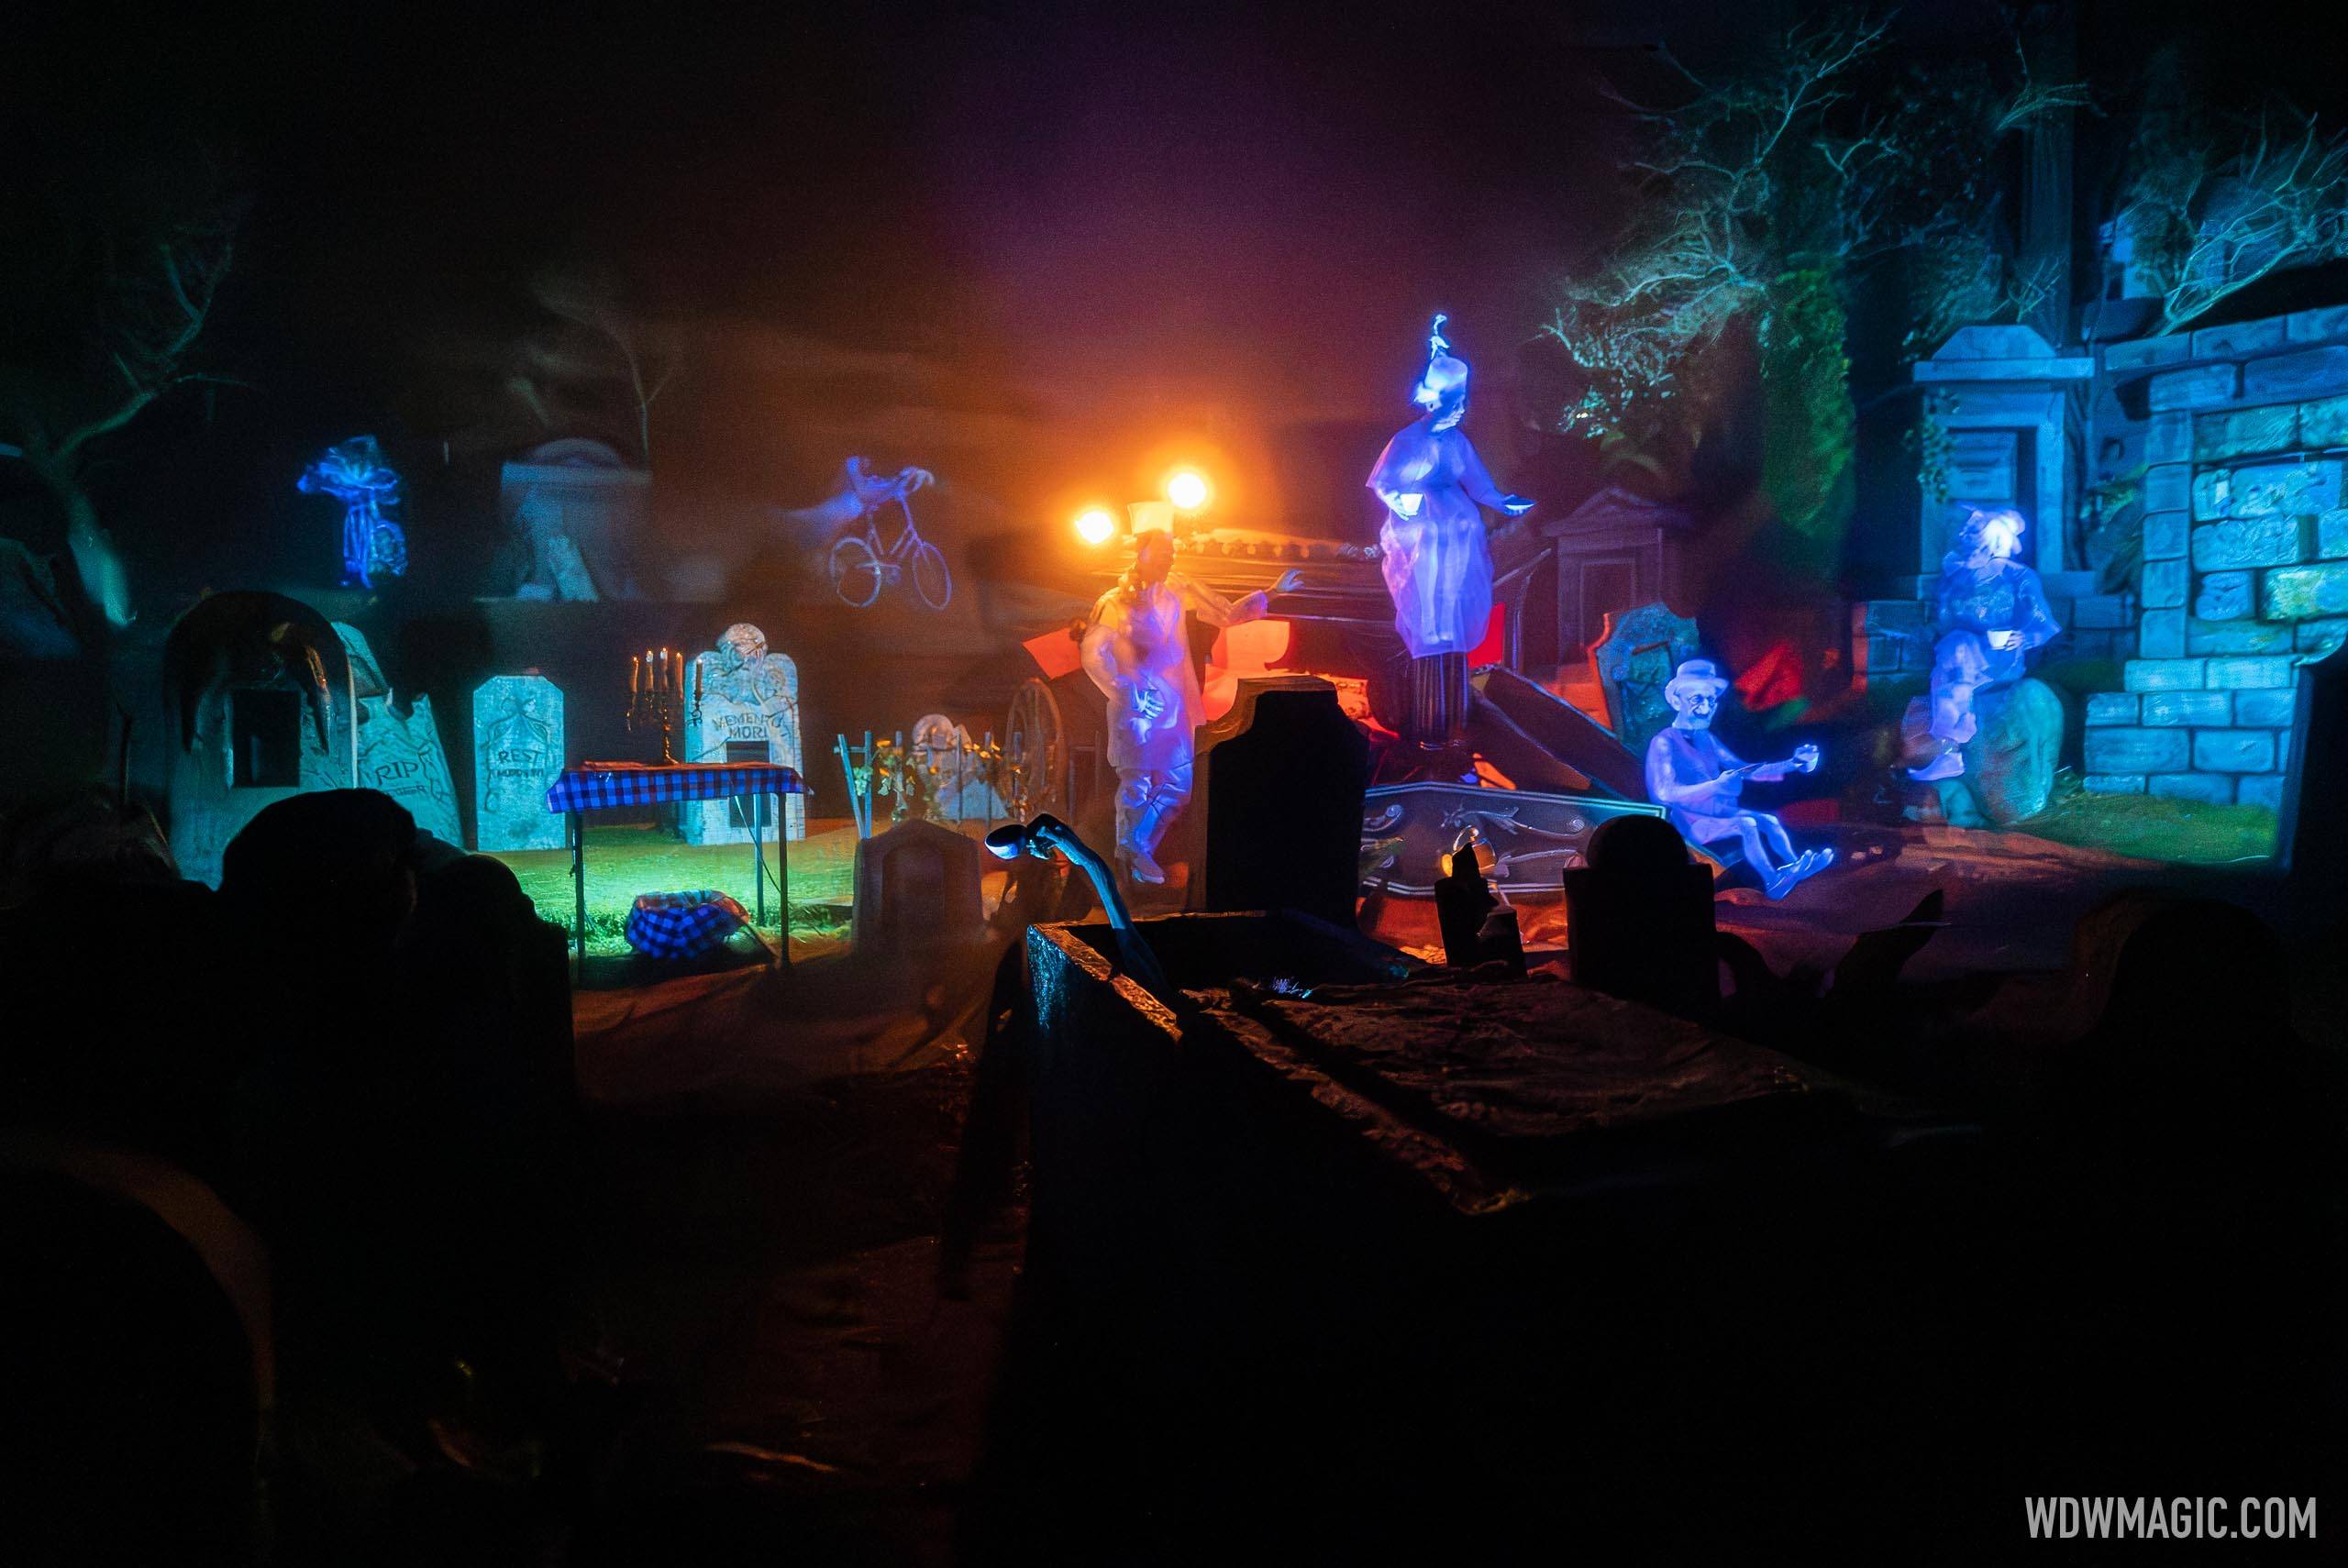 VIDEO - Haunted Mansion debuts amazing new augmented reality Hitchhiking Ghosts scene